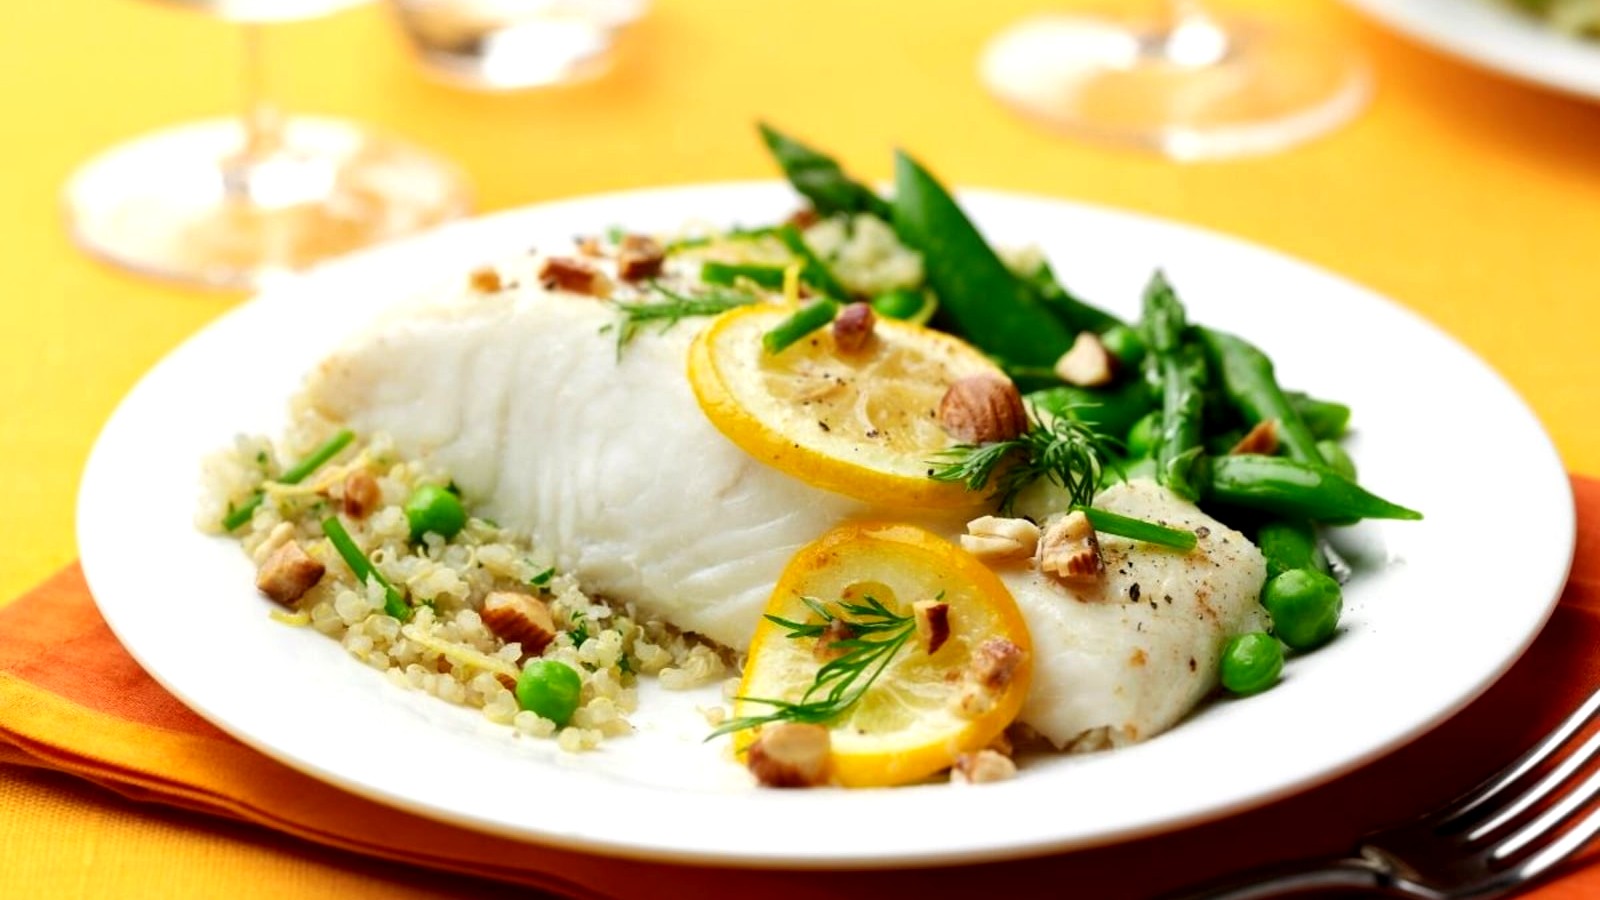 Image of Lemon Roasted Halibut with Quinoa, Almonds and Spring Vegetables